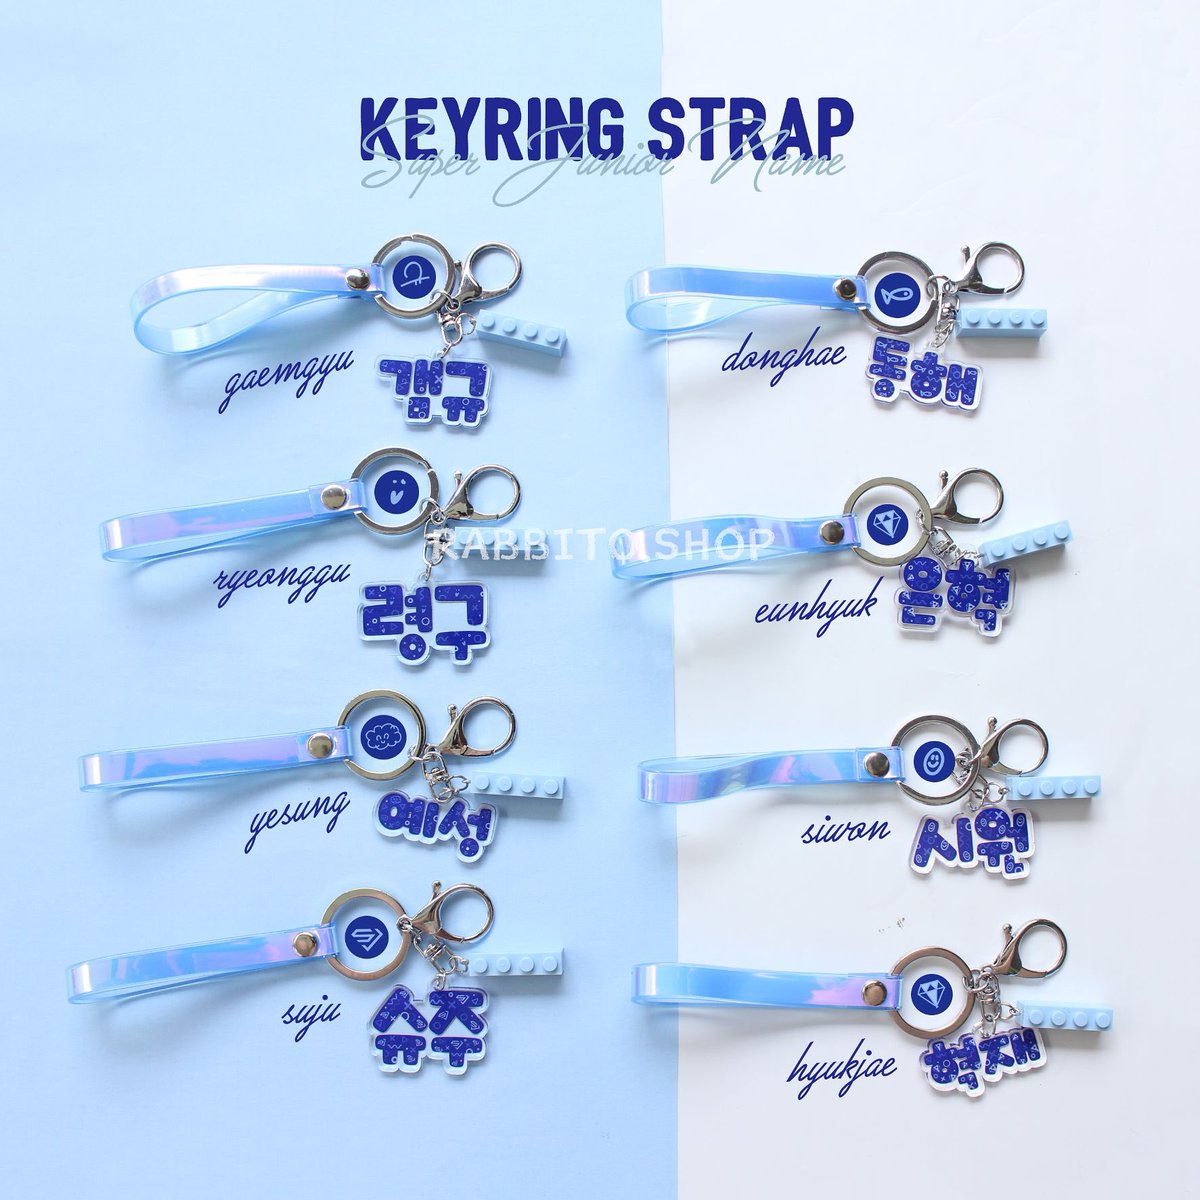 I just open PO for sj name keyring strap. And next I’ll open PO for NCT & Seventeen versionI also accept design request for cupsleeve event/ banner  Shopee:  http://shopee.co.id/bibimcat IG:  @rabbito.shopThank you